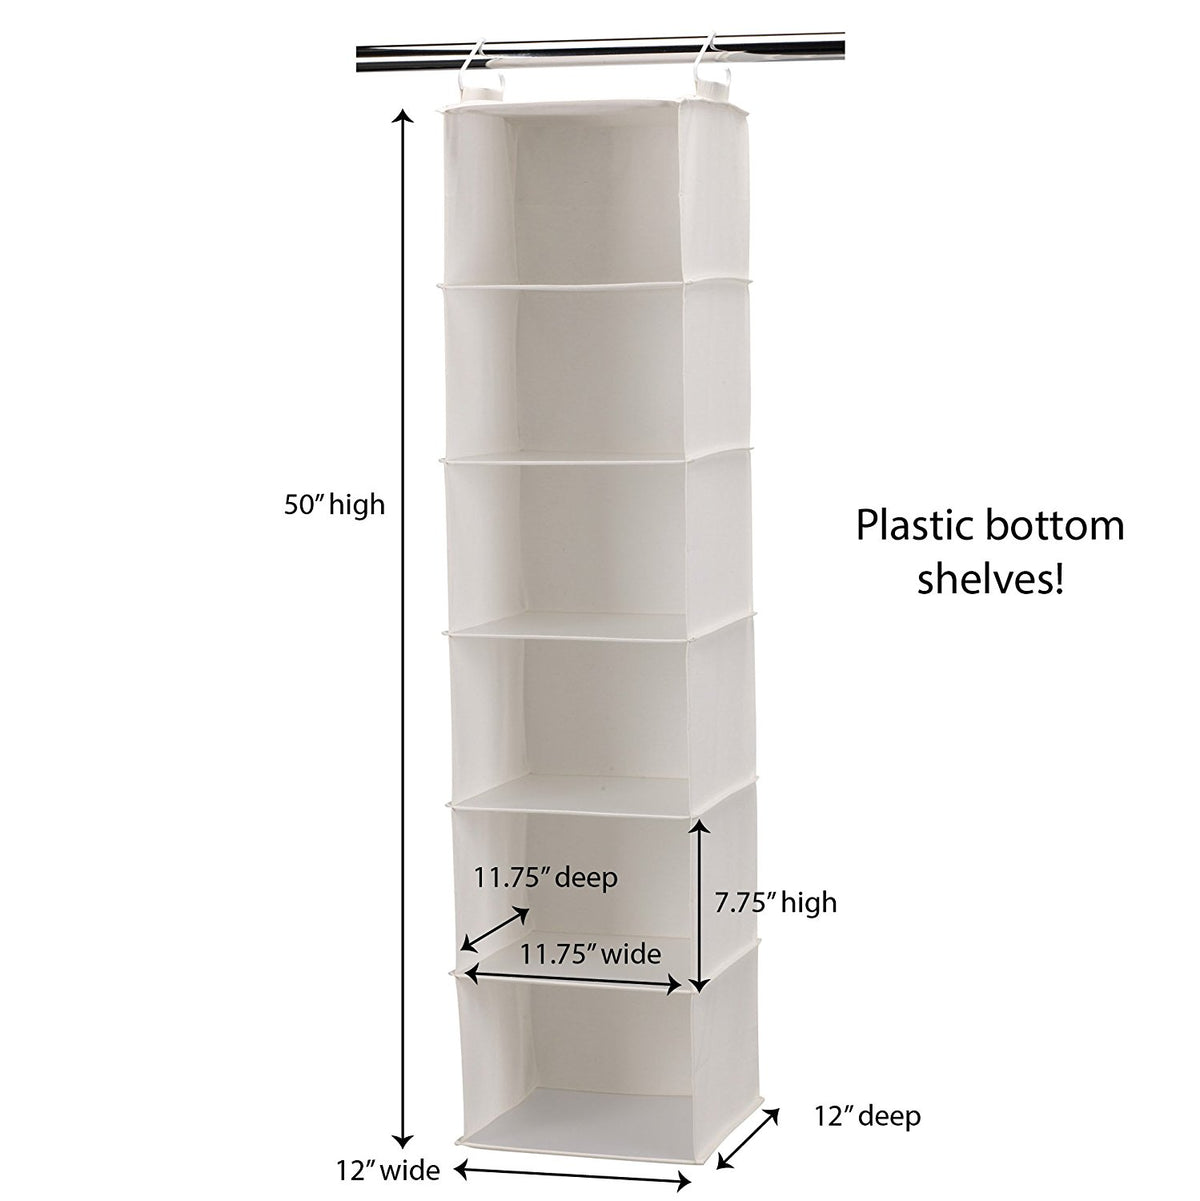 buy closet system attachments at cheap rate in bulk. wholesale & retail storage & organizers supplies store.